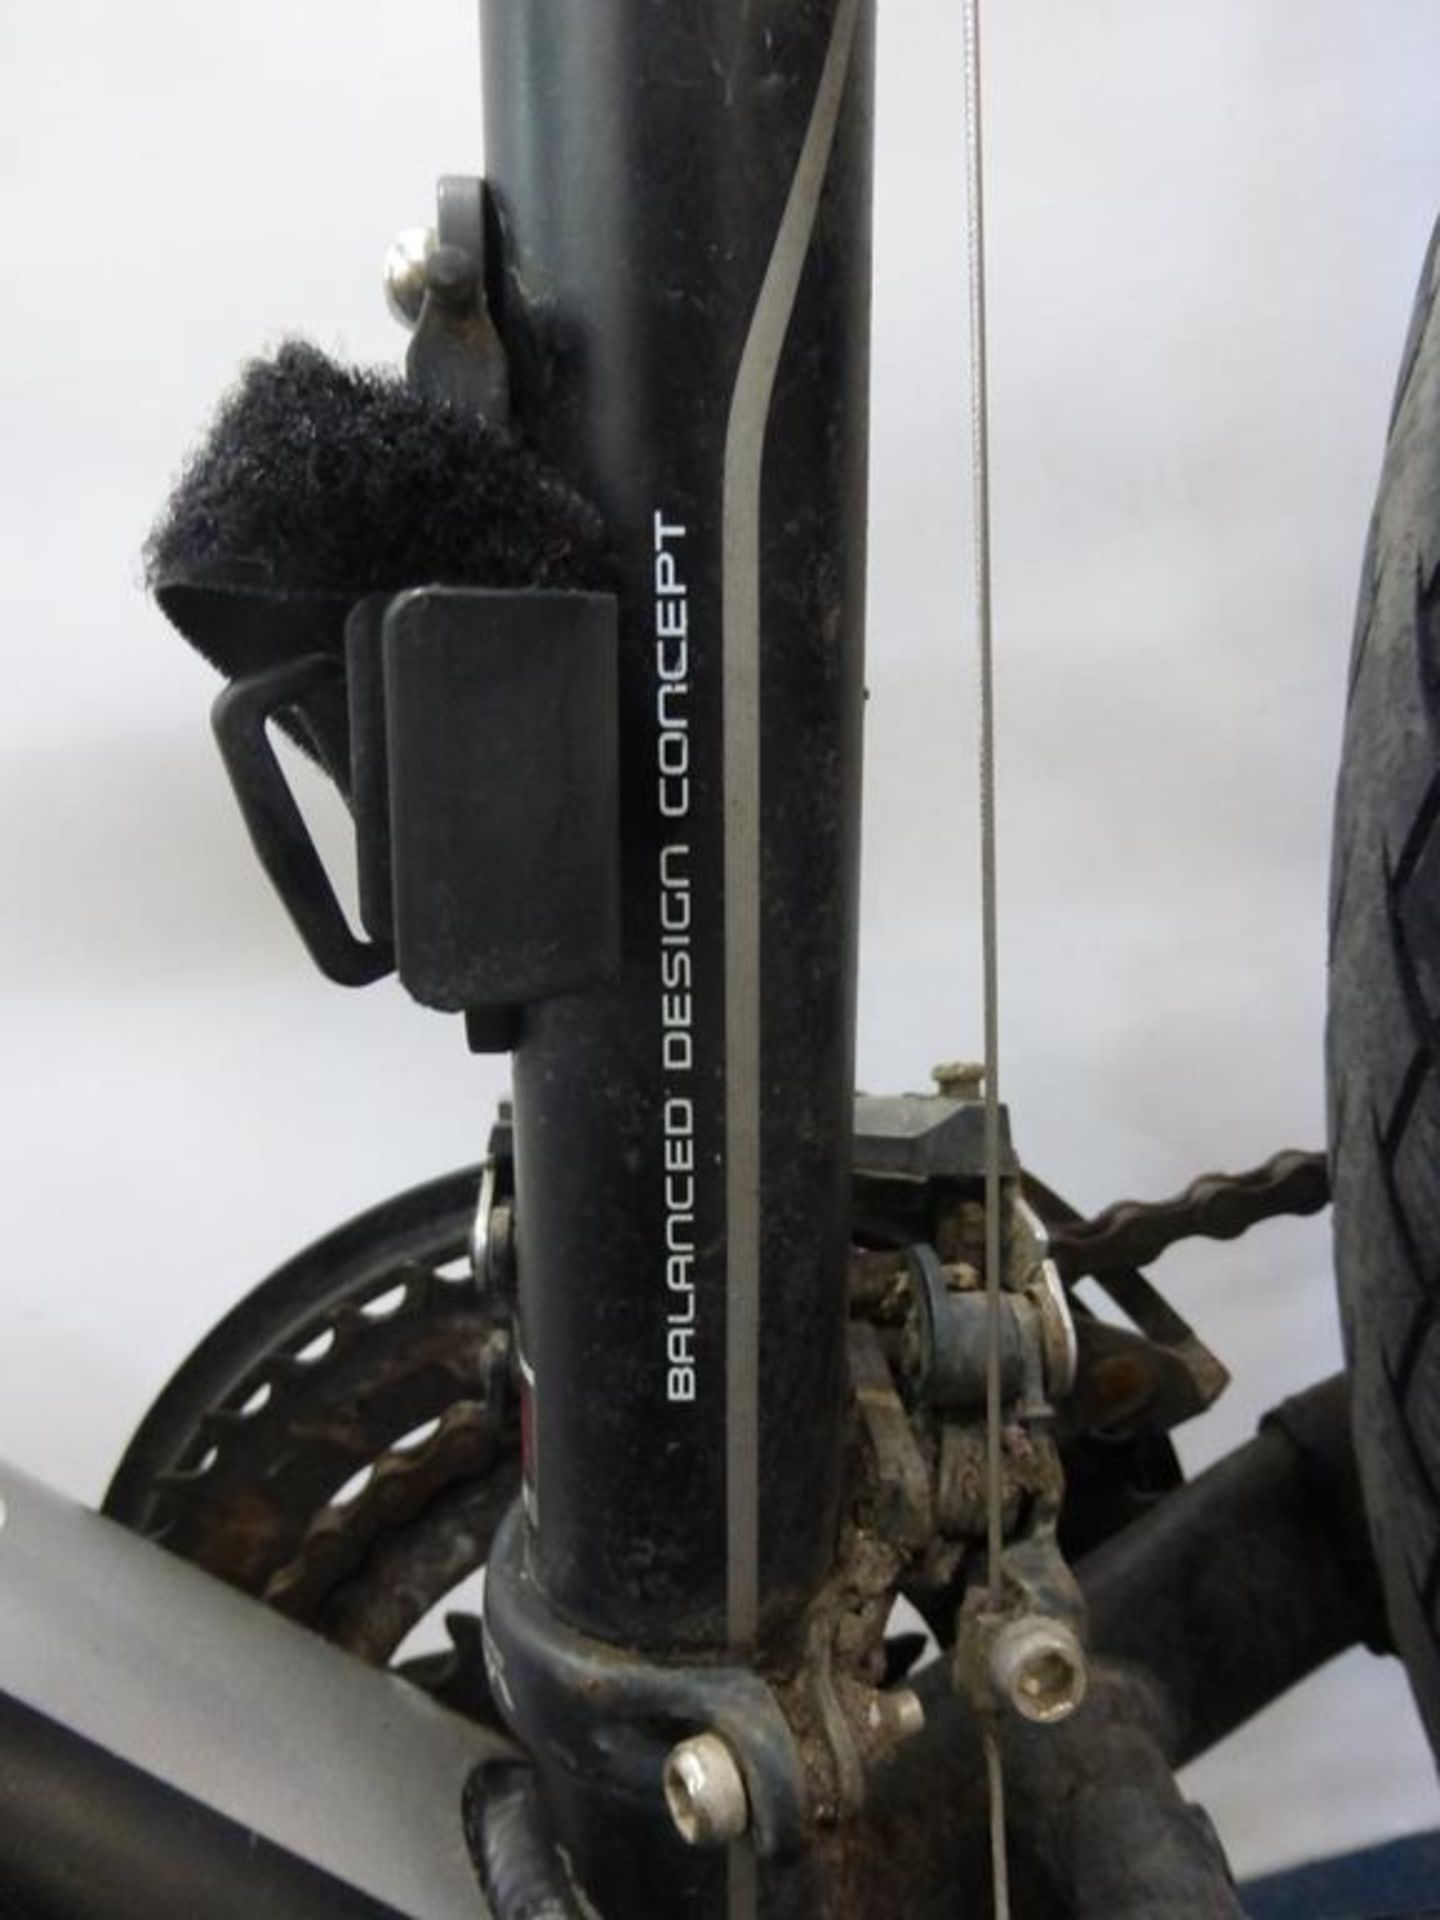 A Used Ideal Hillmaster Mountain Bicycle - Image 22 of 34